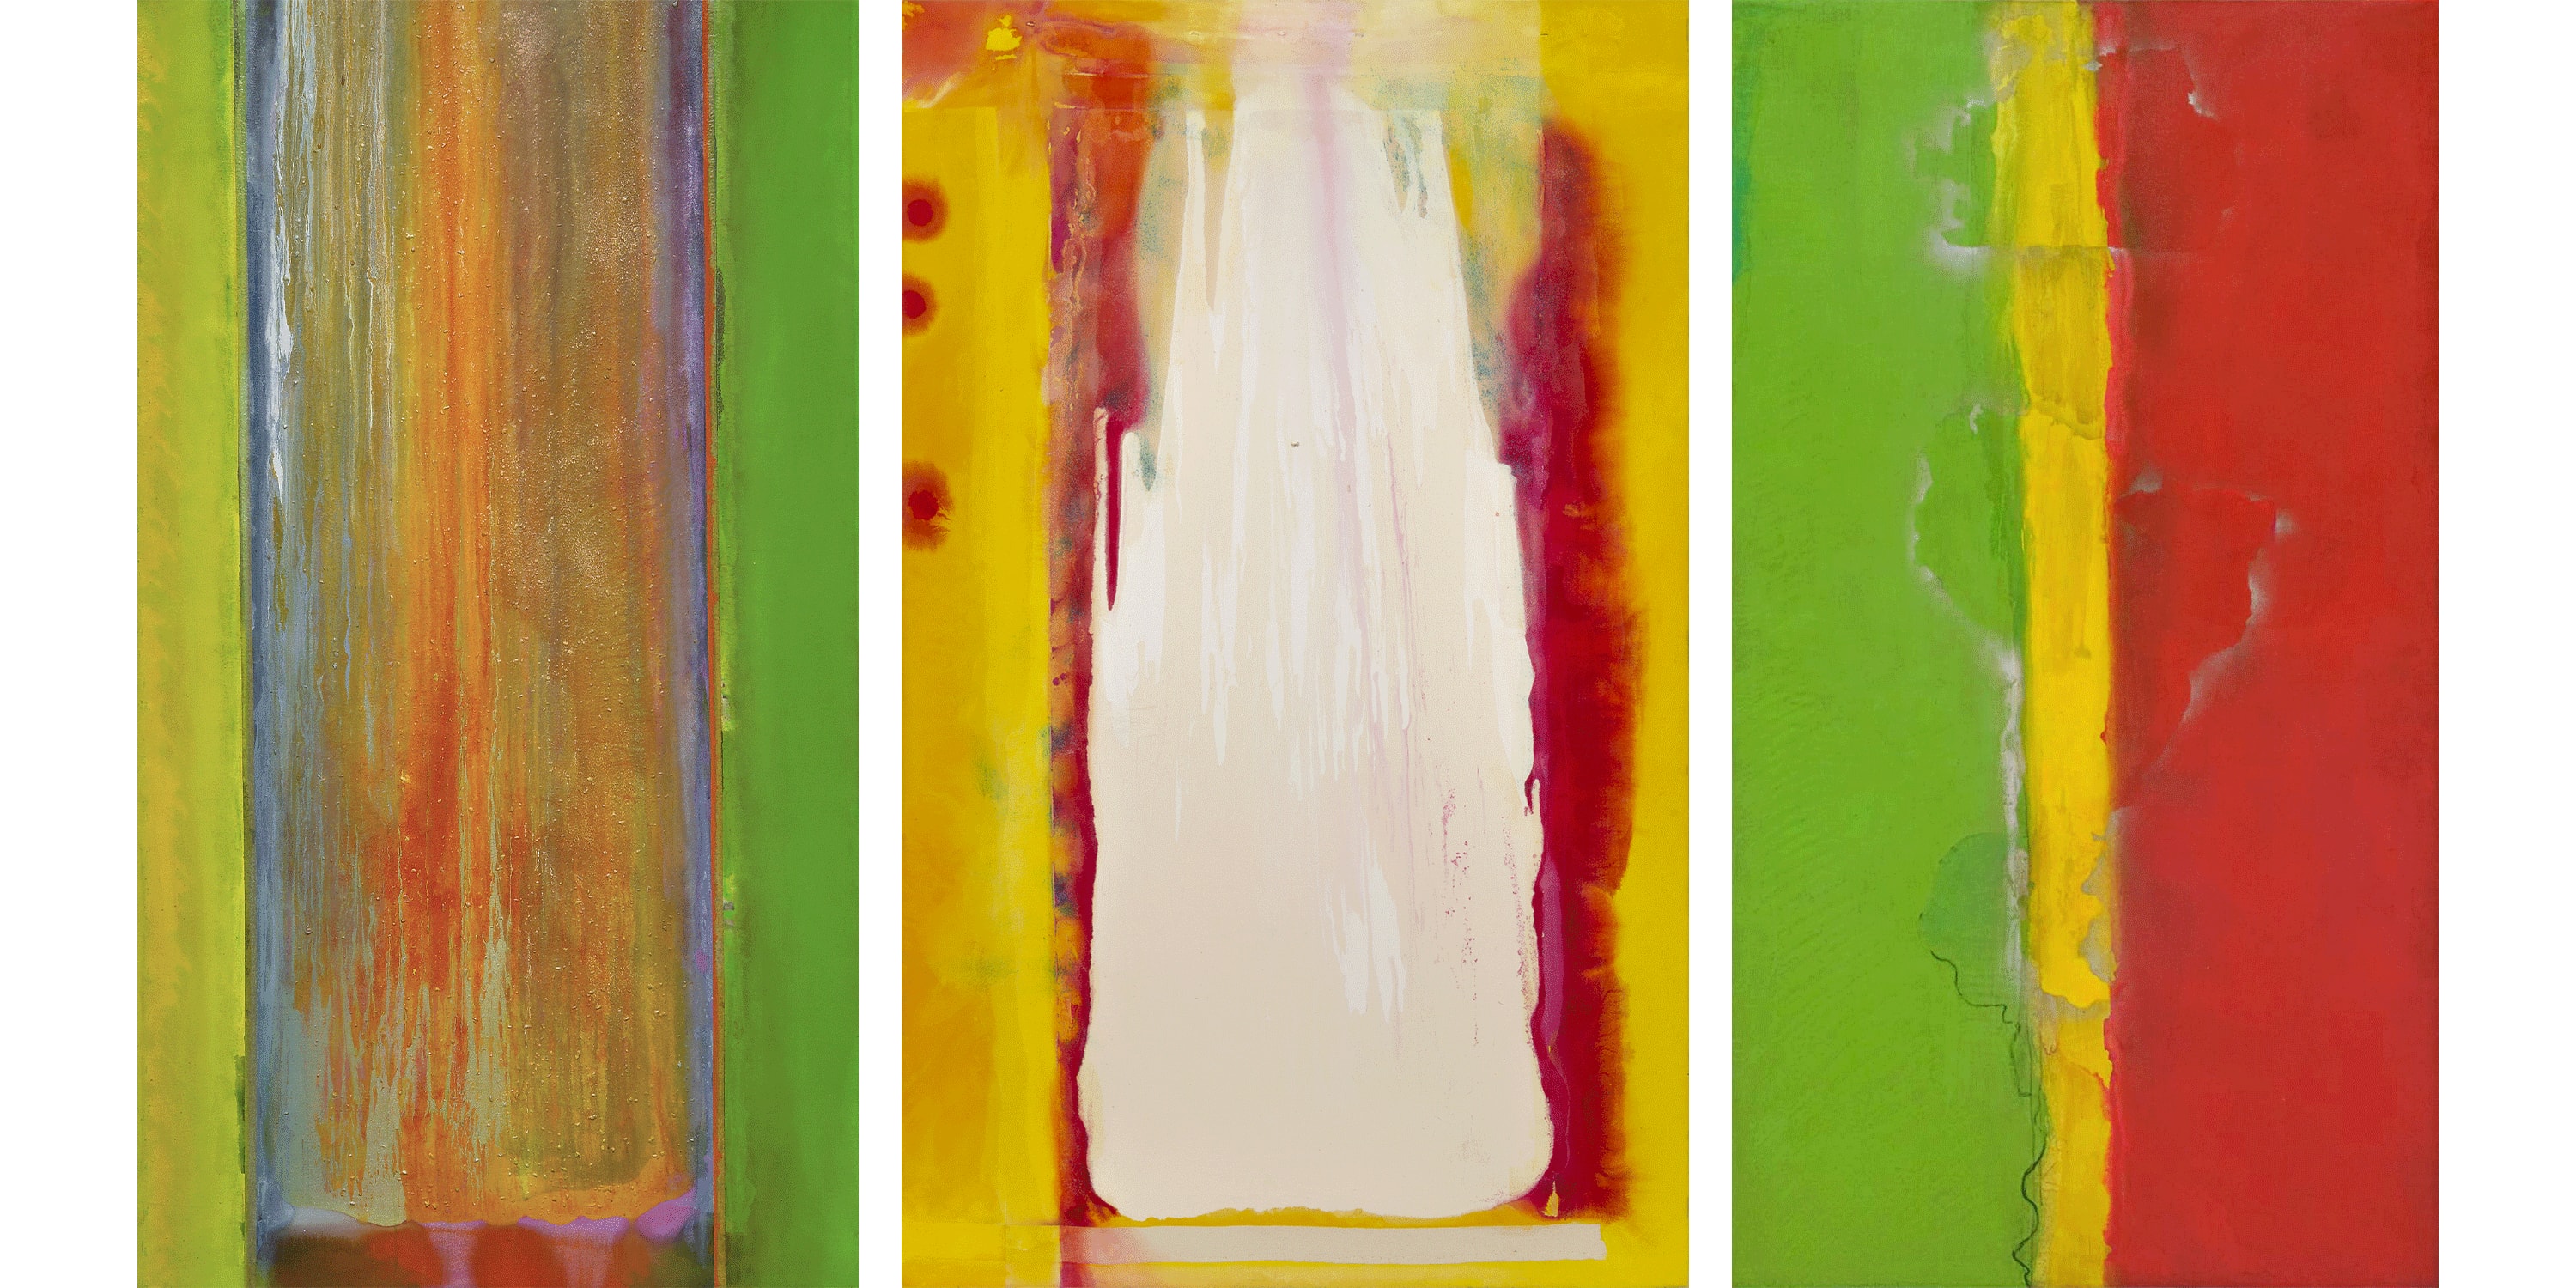 Left to right: 1. Suncrush, 1976 Frank Bowling. Sophie M. Friedman Fund © Frank Bowling. Photograph by the Museum of Fine Arts, Boston. All rights reserved, DACS, London & ARS, New York 2022. 2. Frank Bowling, Woosh, 1974. Private Collection, USA, photograph by Jaime Alvarez, reproduced with permission. © Frank Bowling. All rights reserved, DACS, London & ARS, New York 2022. Courtesy of the Museum of Fine Arts, Boston. 3. Frank Bowling, Who's Afraid of Barney Newman, 1968. Tate: Presented by Rachel Scott, 2006. © Frank Bowling. All rights reserved, DACS/Artimage, London & ARS, New York 2022. Courtesy of the Museum of Fine Arts, Boston.